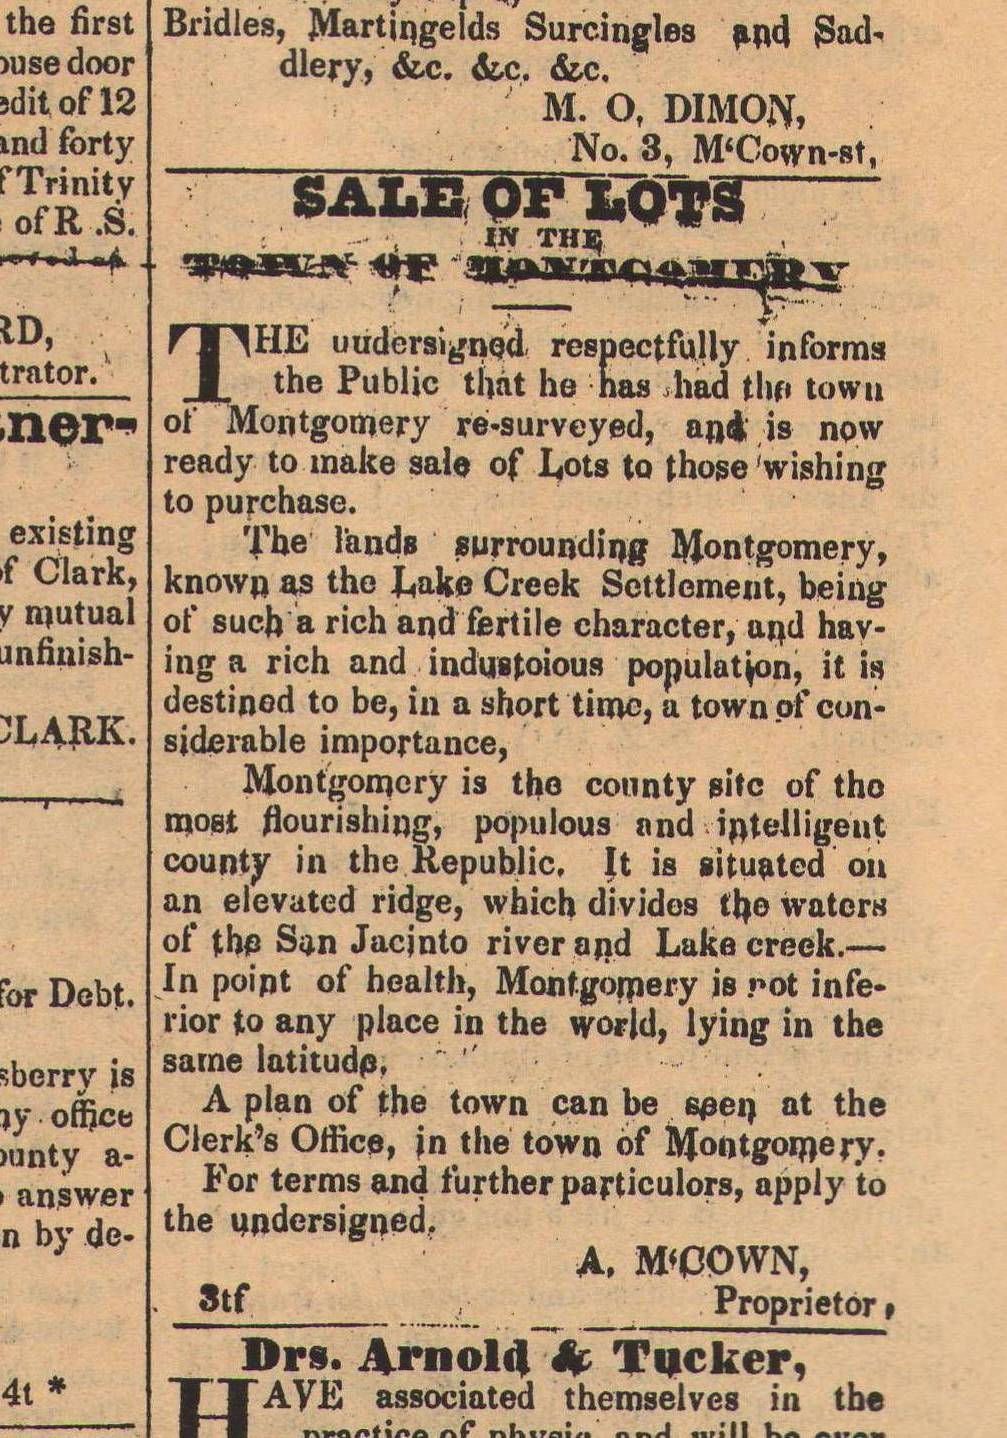 Click here to read all 4 pages of the July 2, 1845 edition of the Montgomery Patriot newspaper